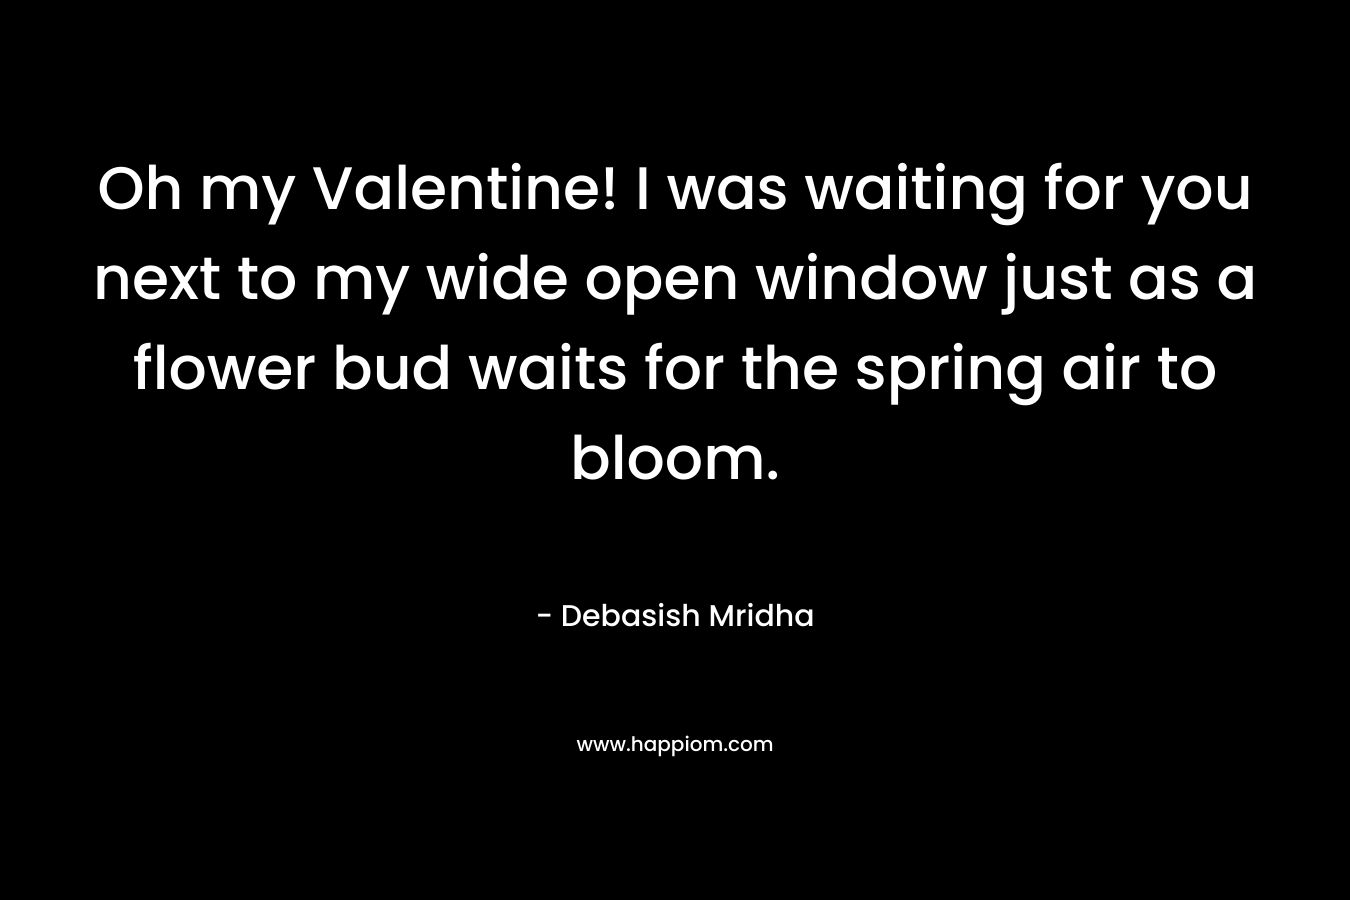 Oh my Valentine! I was waiting for you next to my wide open window just as a flower bud waits for the spring air to bloom. – Debasish Mridha